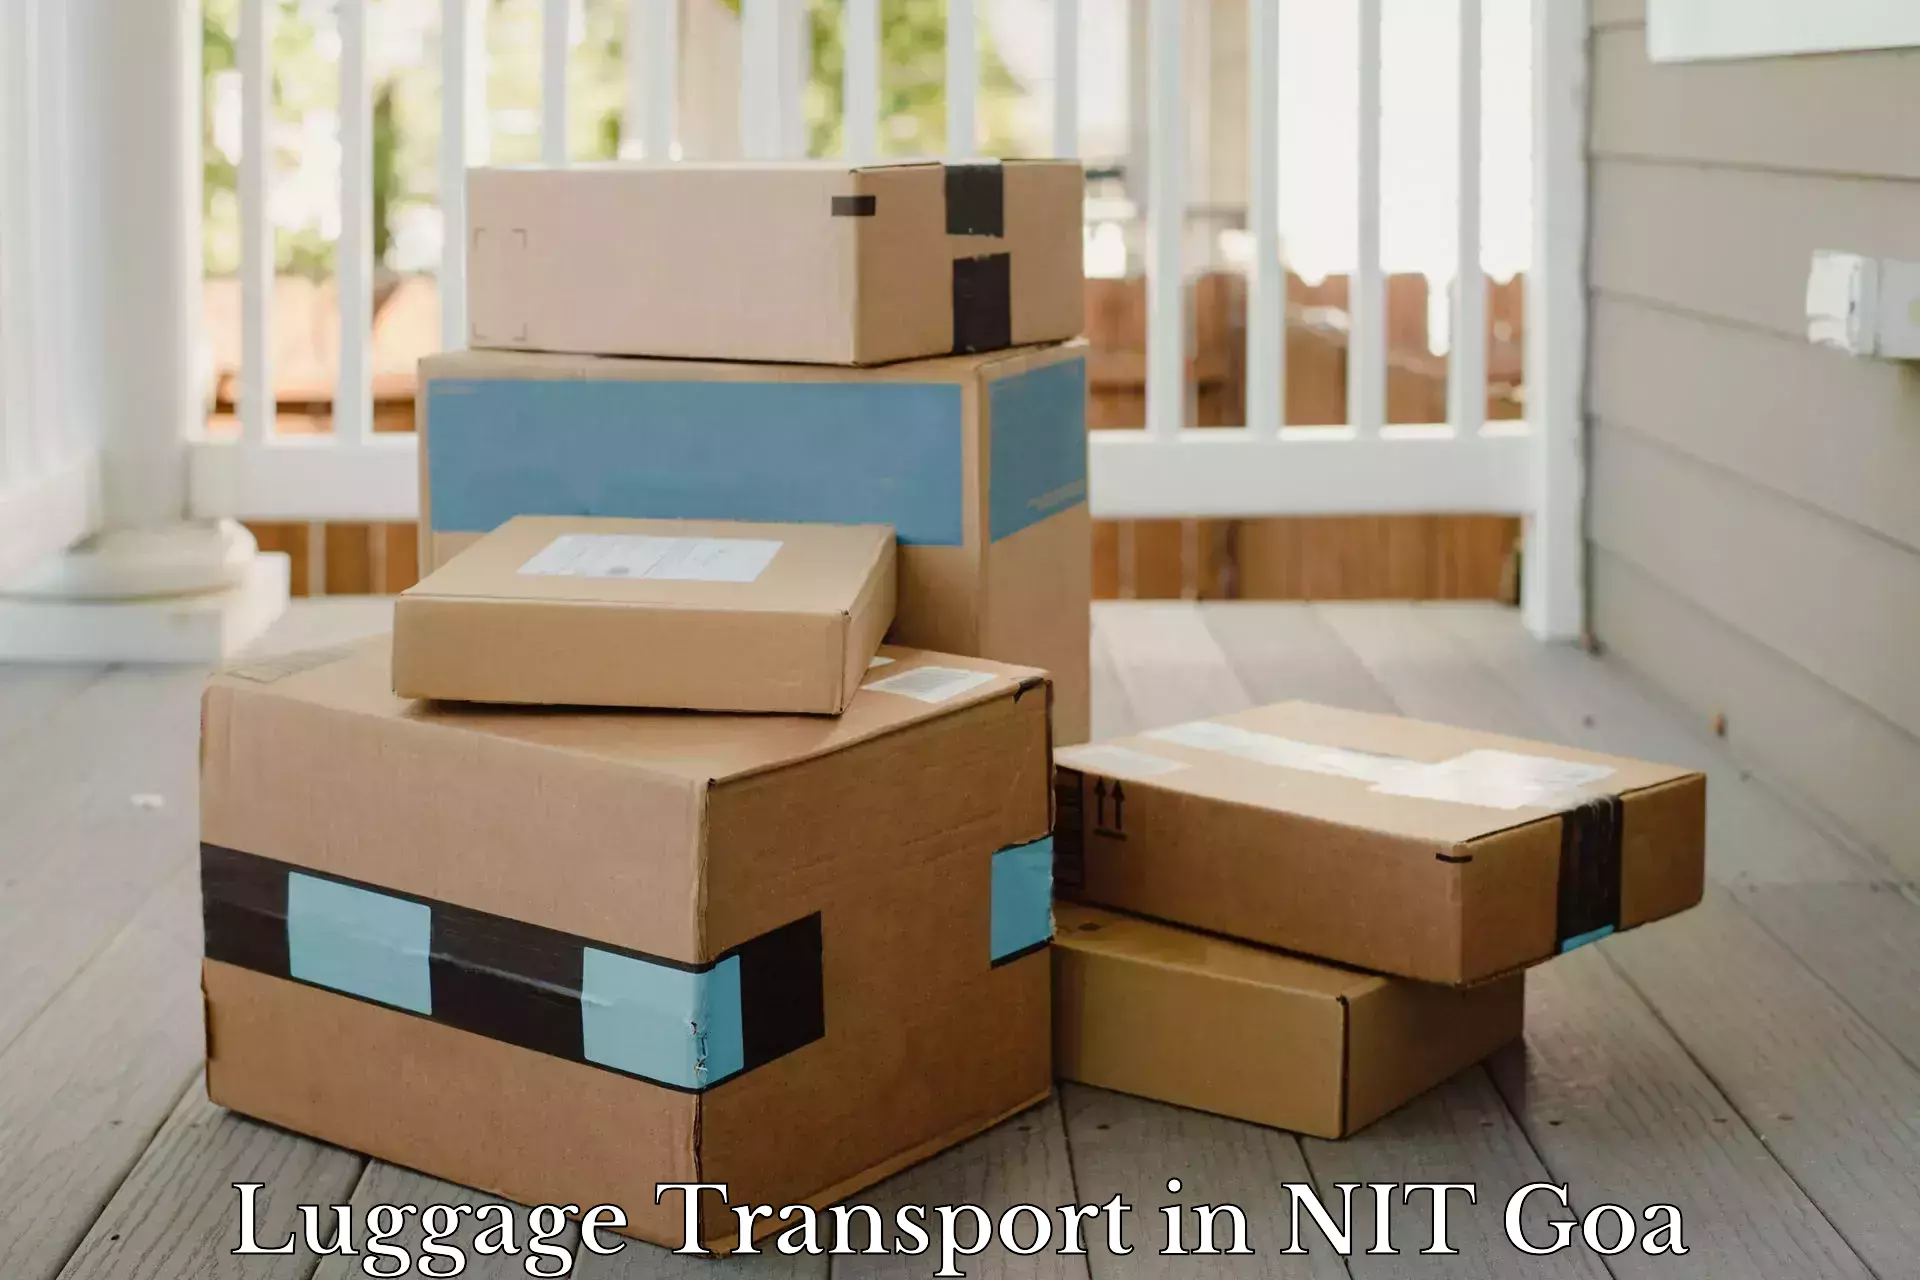 Instant baggage transport quote in NIT Goa